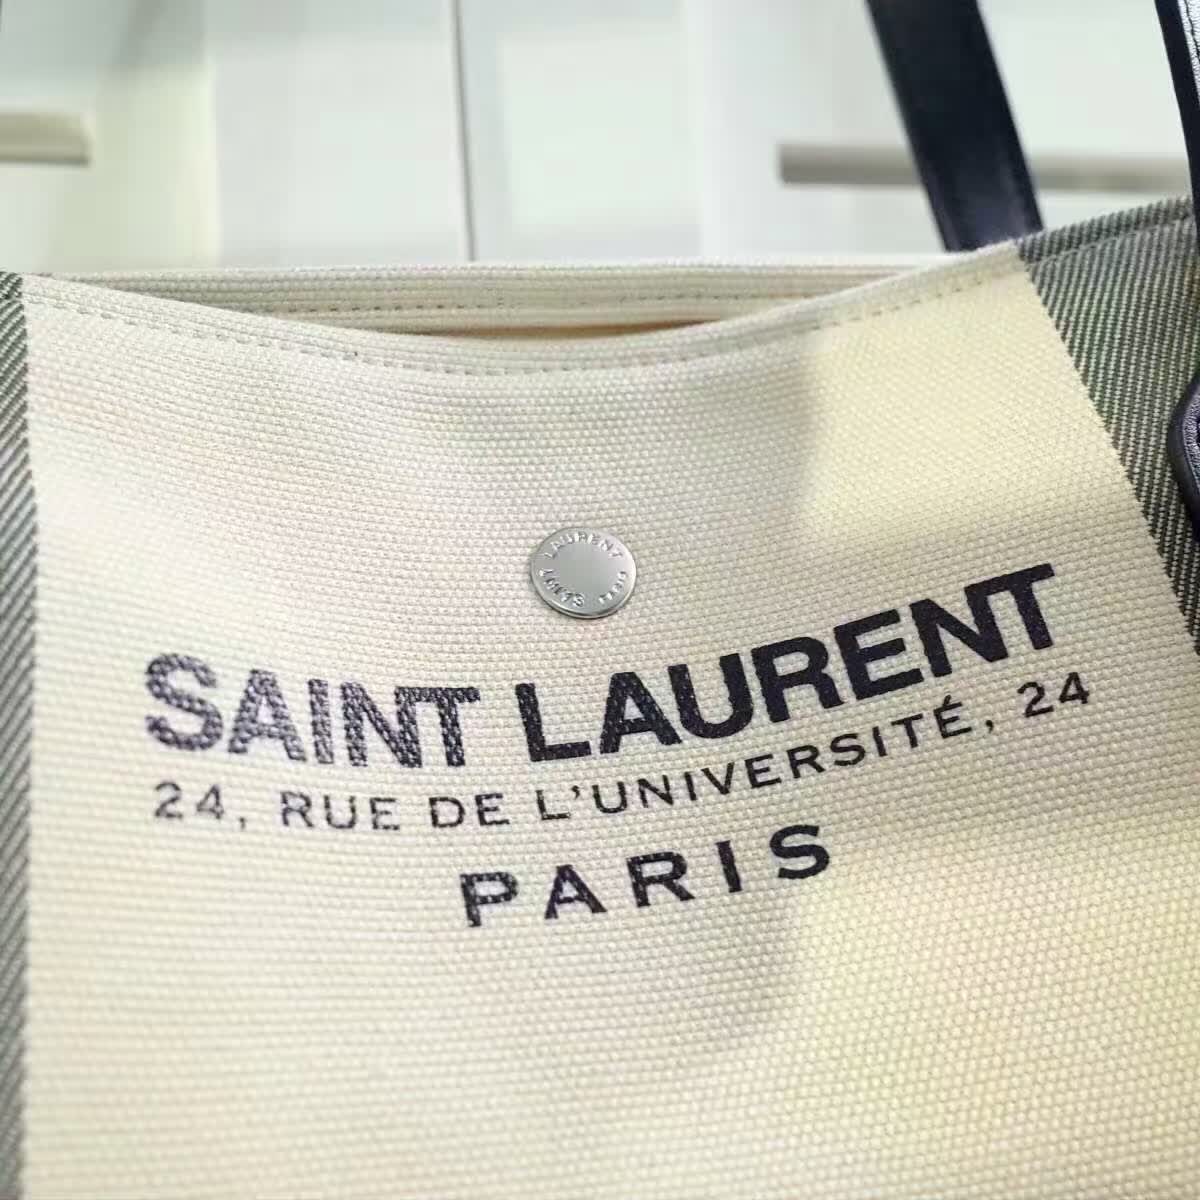 Limited Edition!2016 Cheap YSL Out Sale with Free Shipping-Saint Laurent Beach Shopping East/West Tote Bag in Light Beige and Khaki Canvas and Black Leather - Click Image to Close